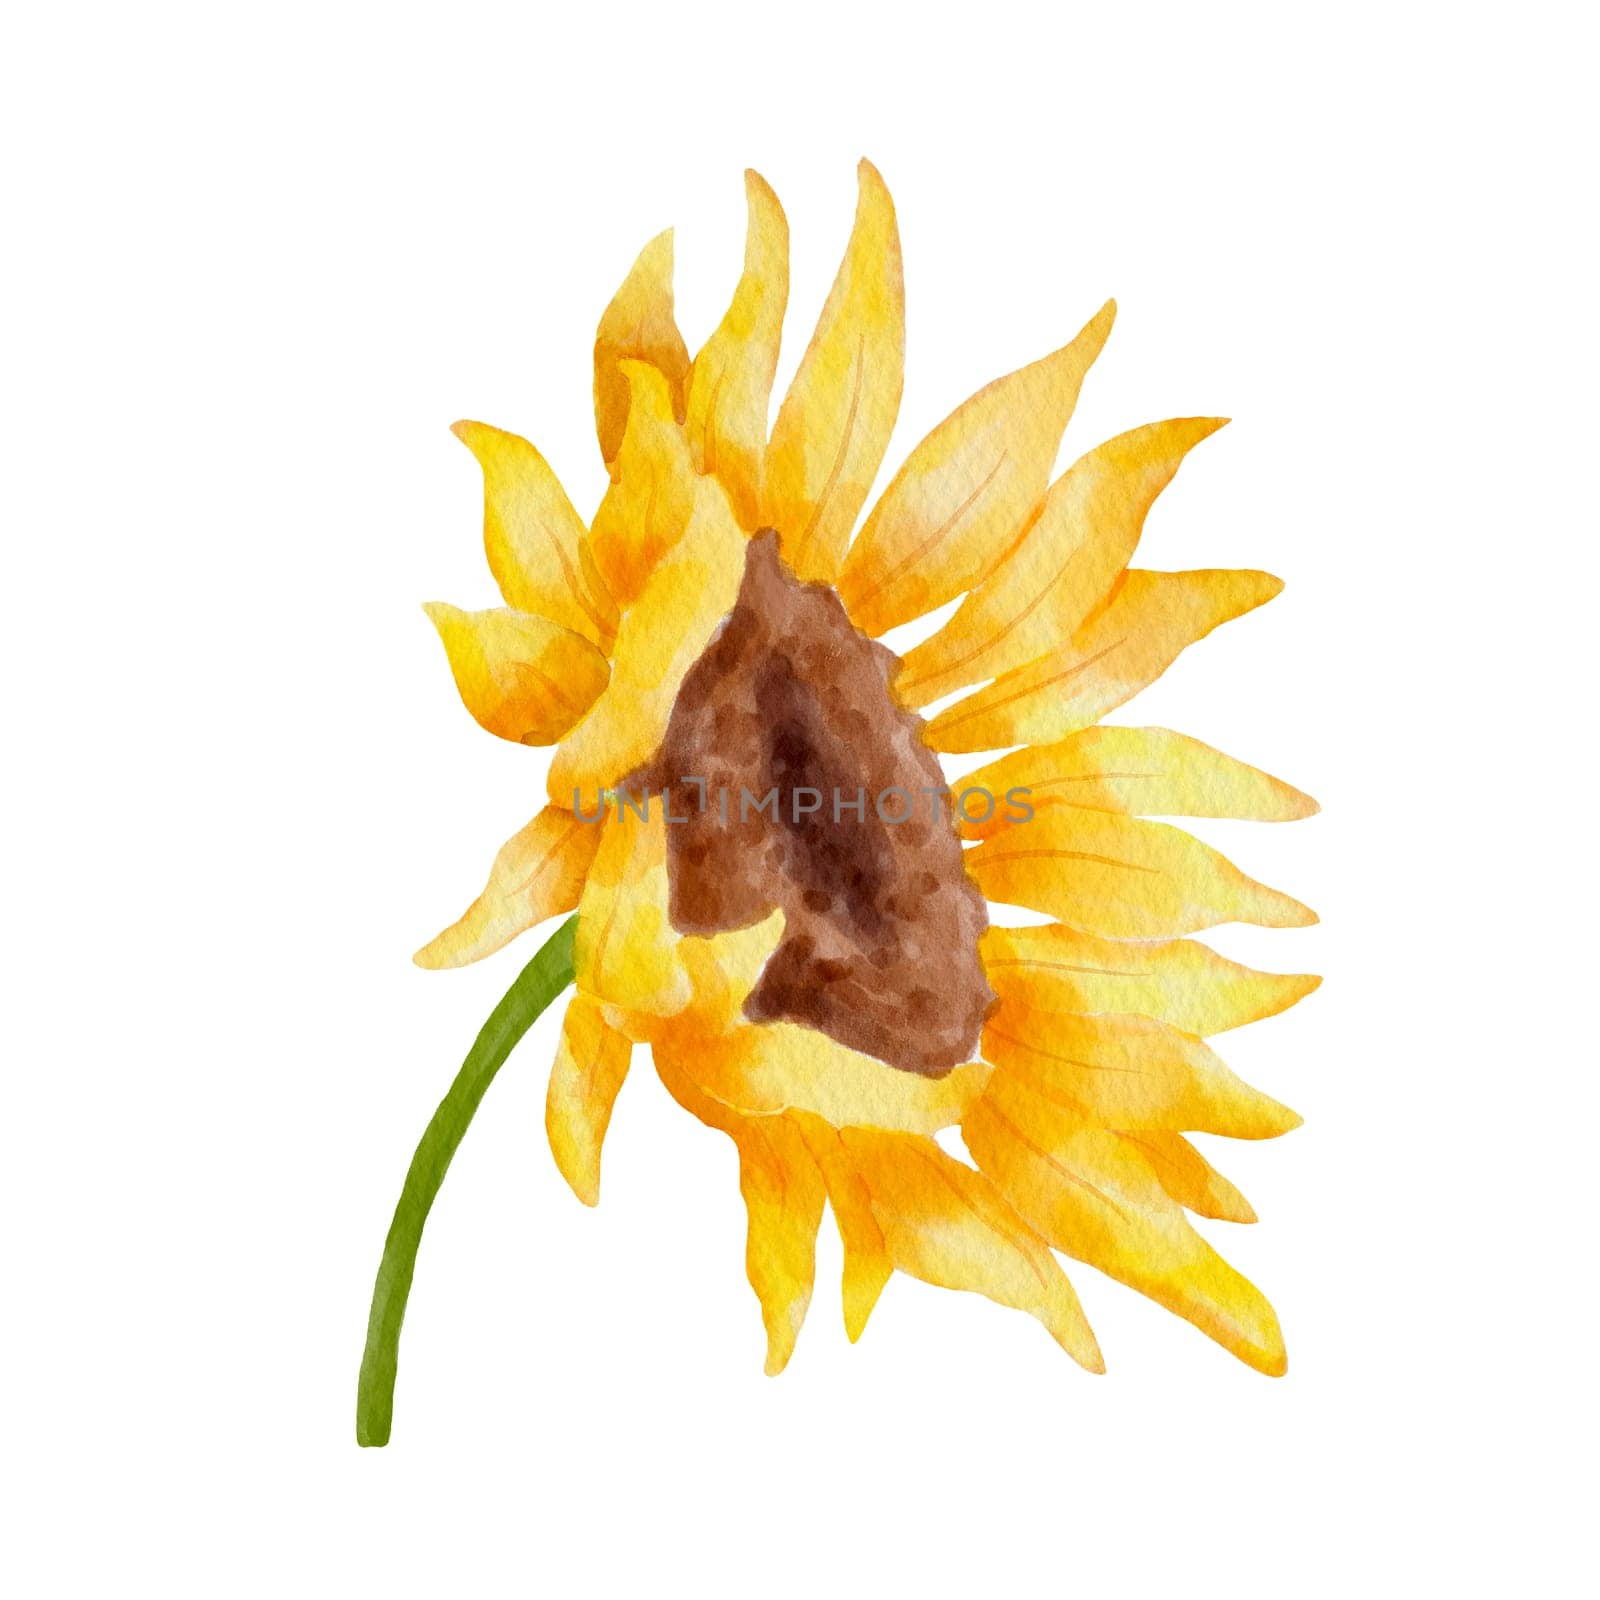 Watercolor sunflower. Colorful botanical hand drawn flower illustration isolated on white